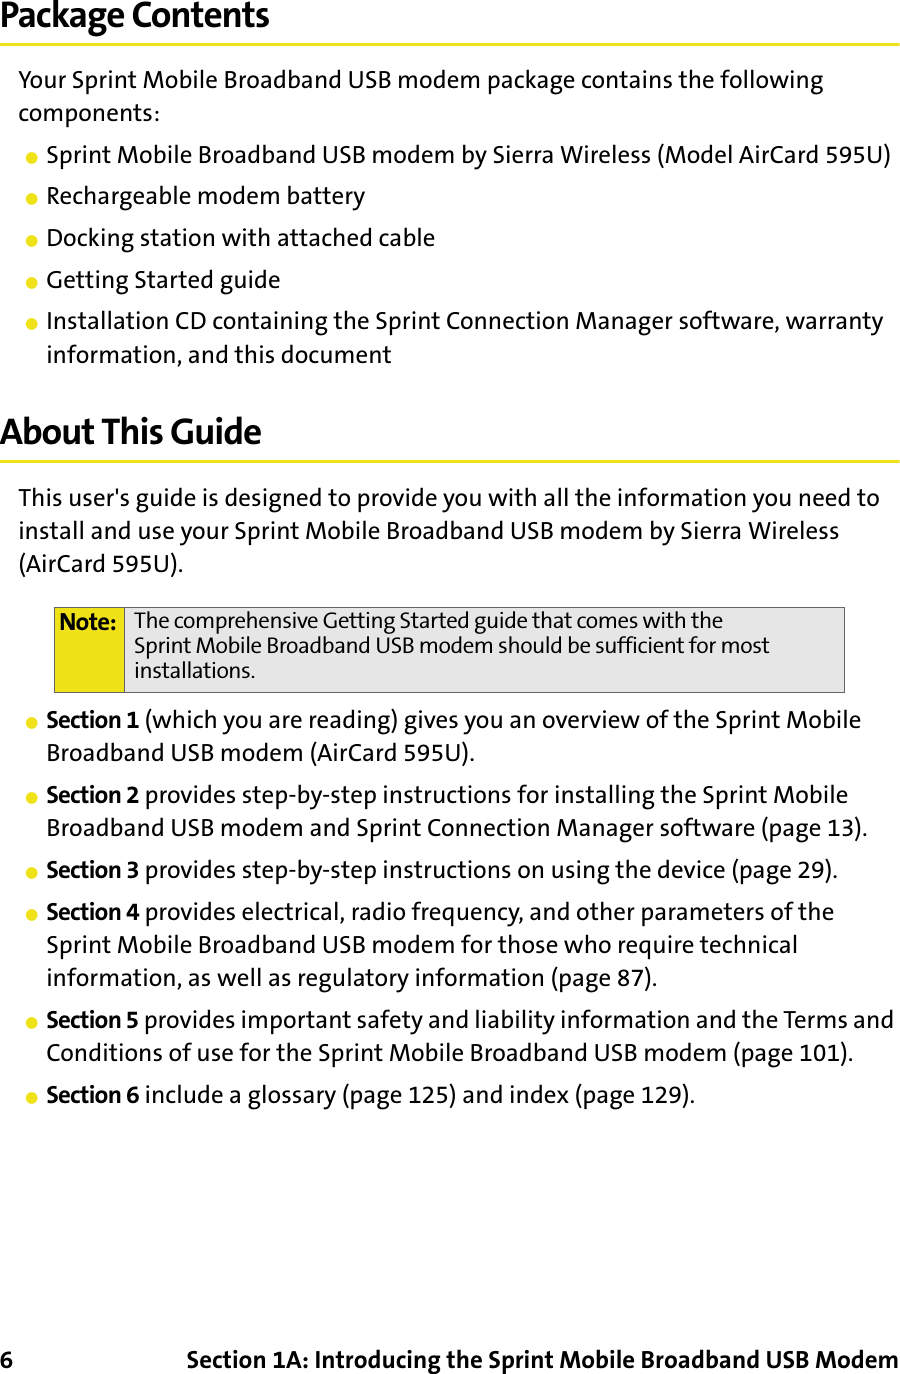 6 Section 1A: Introducing the Sprint Mobile Broadband USB ModemPackage ContentsYour Sprint Mobile Broadband USB modem package contains the following components:䢇Sprint Mobile Broadband USB modem by Sierra Wireless (Model AirCard 595U)䢇Rechargeable modem battery䢇Docking station with attached cable䢇Getting Started guide䢇Installation CD containing the Sprint Connection Manager software, warranty information, and this documentAbout This GuideThis user&apos;s guide is designed to provide you with all the information you need to install and use your Sprint Mobile Broadband USB modem by Sierra Wireless (AirCard 595U).䢇Section 1 (which you are reading) gives you an overview of the Sprint Mobile Broadband USB modem (AirCard 595U).䢇Section 2 provides step-by-step instructions for installing the Sprint Mobile Broadband USB modem and Sprint Connection Manager software (page 13).䢇Section 3 provides step-by-step instructions on using the device (page 29).䢇Section 4 provides electrical, radio frequency, and other parameters of the Sprint Mobile Broadband USB modem for those who require technical information, as well as regulatory information (page 87).䢇Section 5 provides important safety and liability information and the Terms and Conditions of use for the Sprint Mobile Broadband USB modem (page 101).䢇Section 6 include a glossary (page 125) and index (page 129).Note: The comprehensive Getting Started guide that comes with the Sprint Mobile Broadband USB modem should be sufficient for most installations.